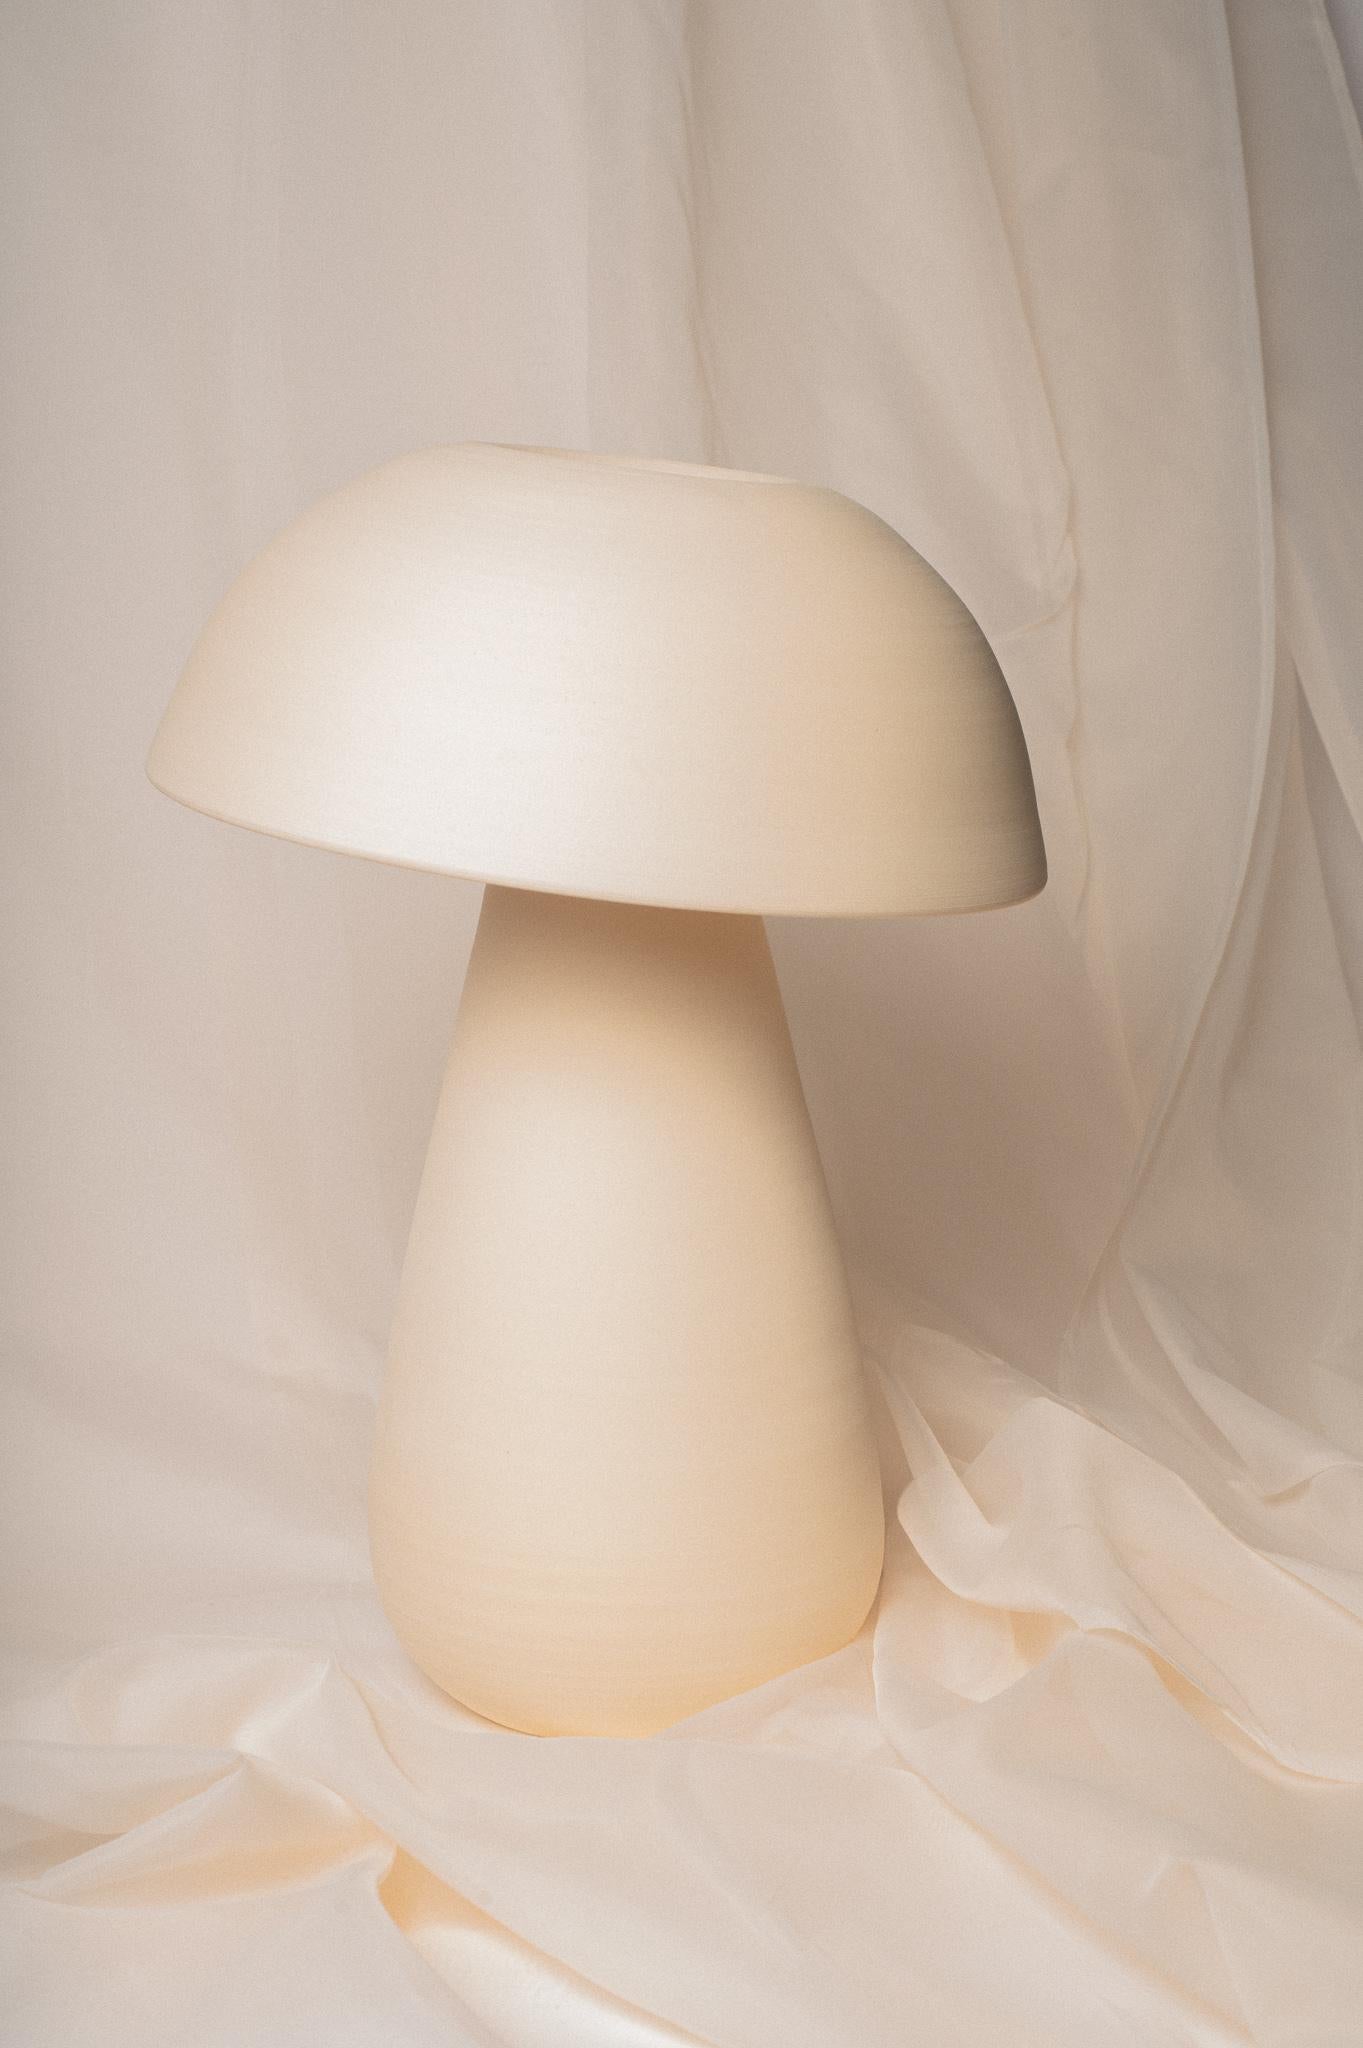 American Black Raw Small Mushroom Lamp by Nick Pourfard For Sale